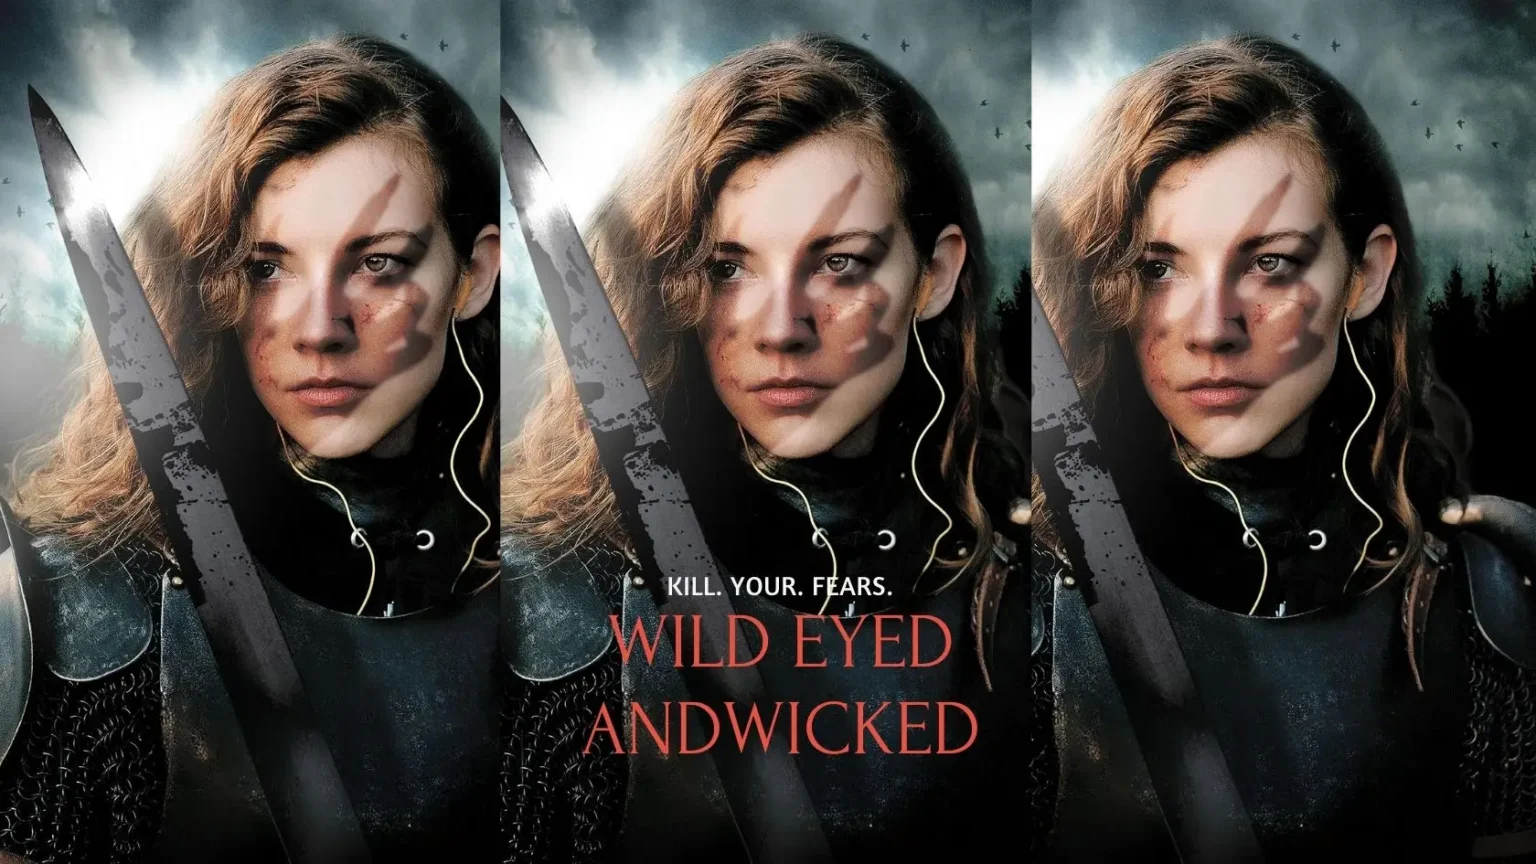 Wild Eyed and Wicked Filming Locations